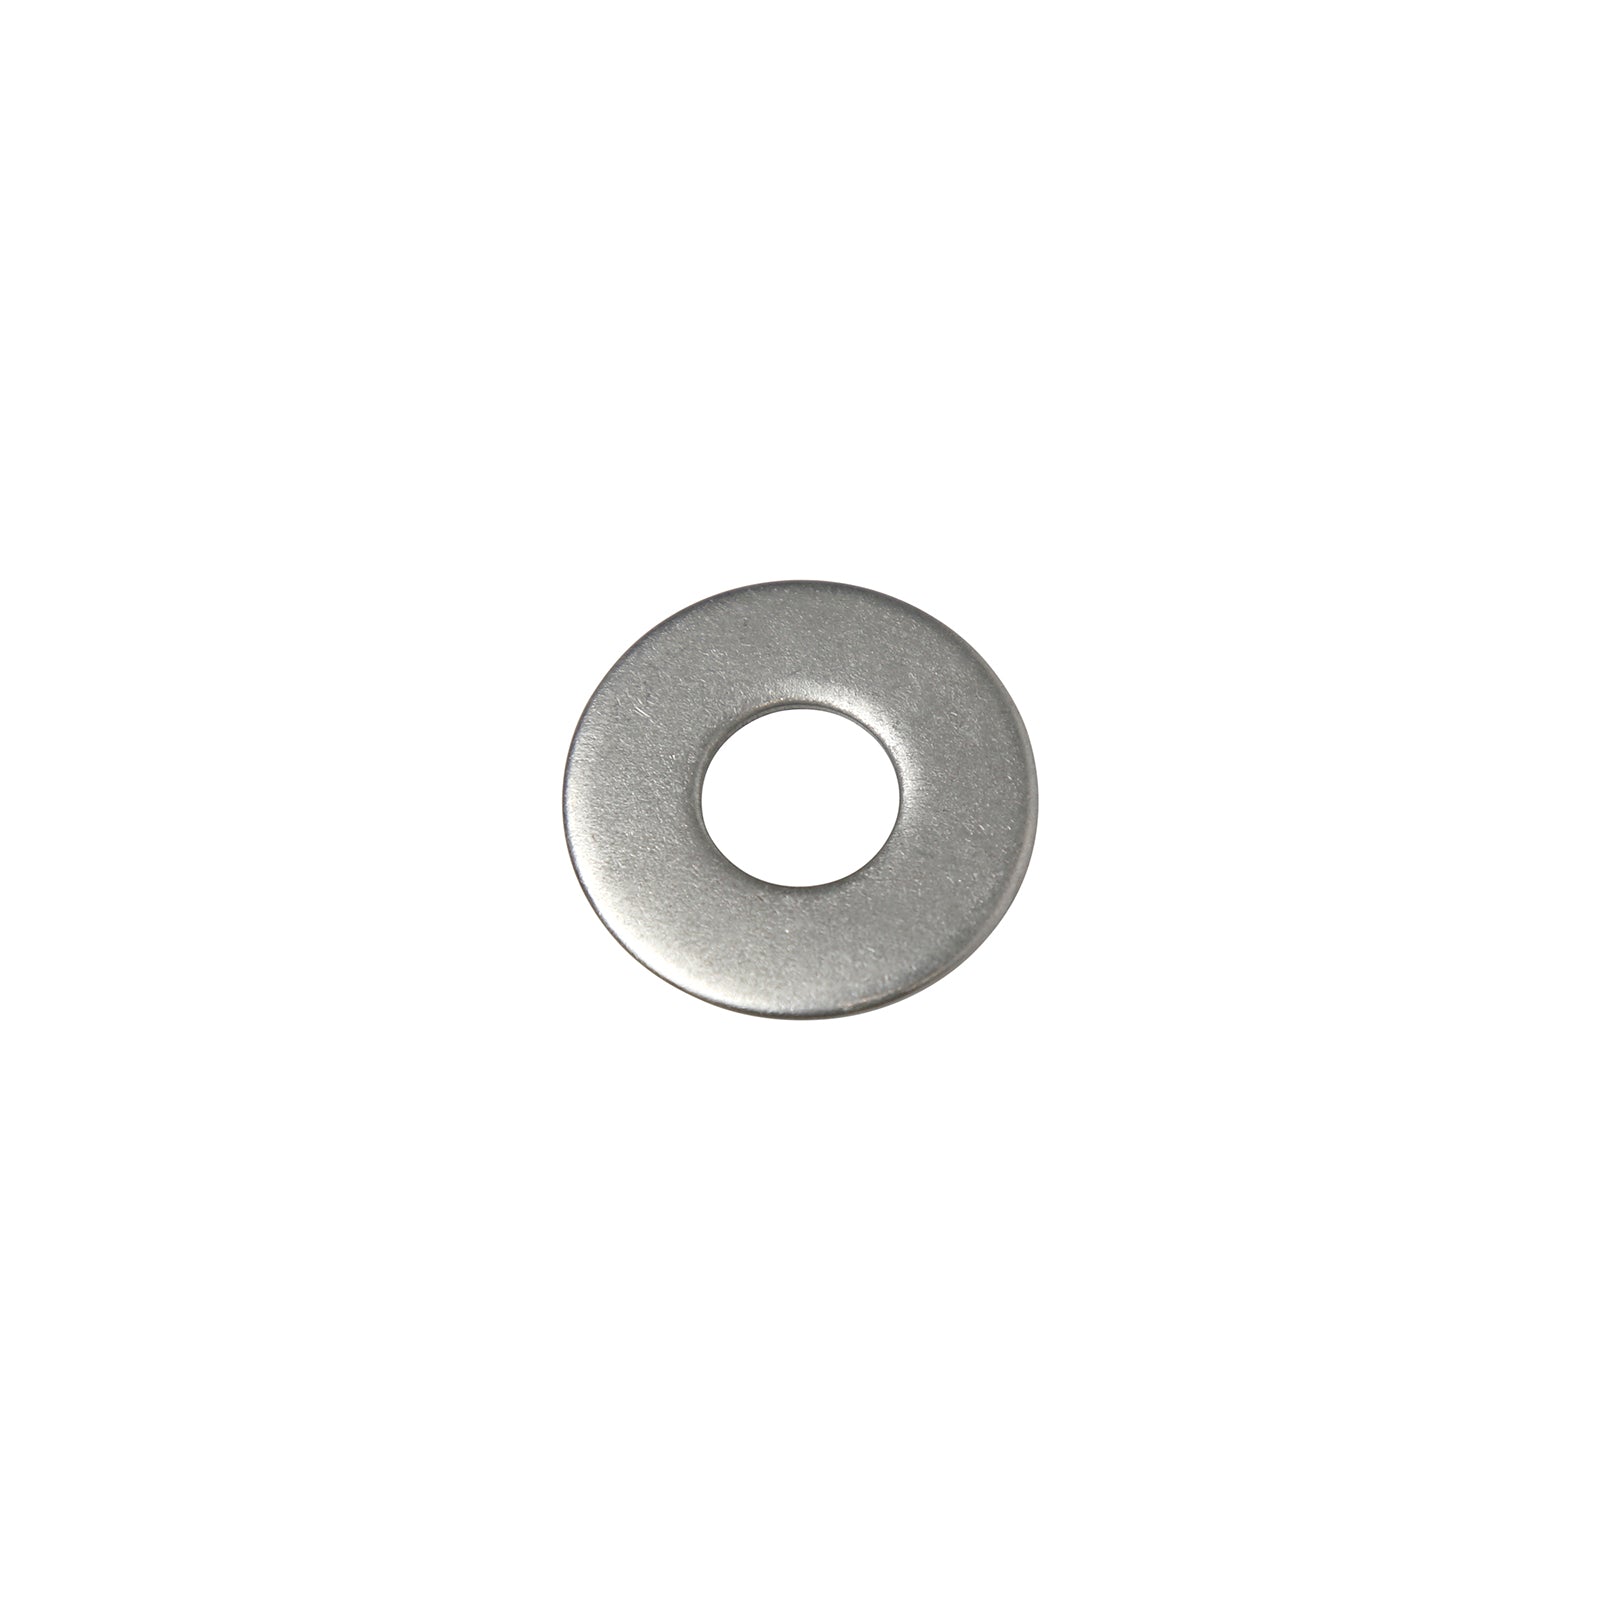 Beduan 1/2ID x 1OD Flat Washer, Stainless Steel 304 Plain Finish, Nominal Thickness (Pack of 110)